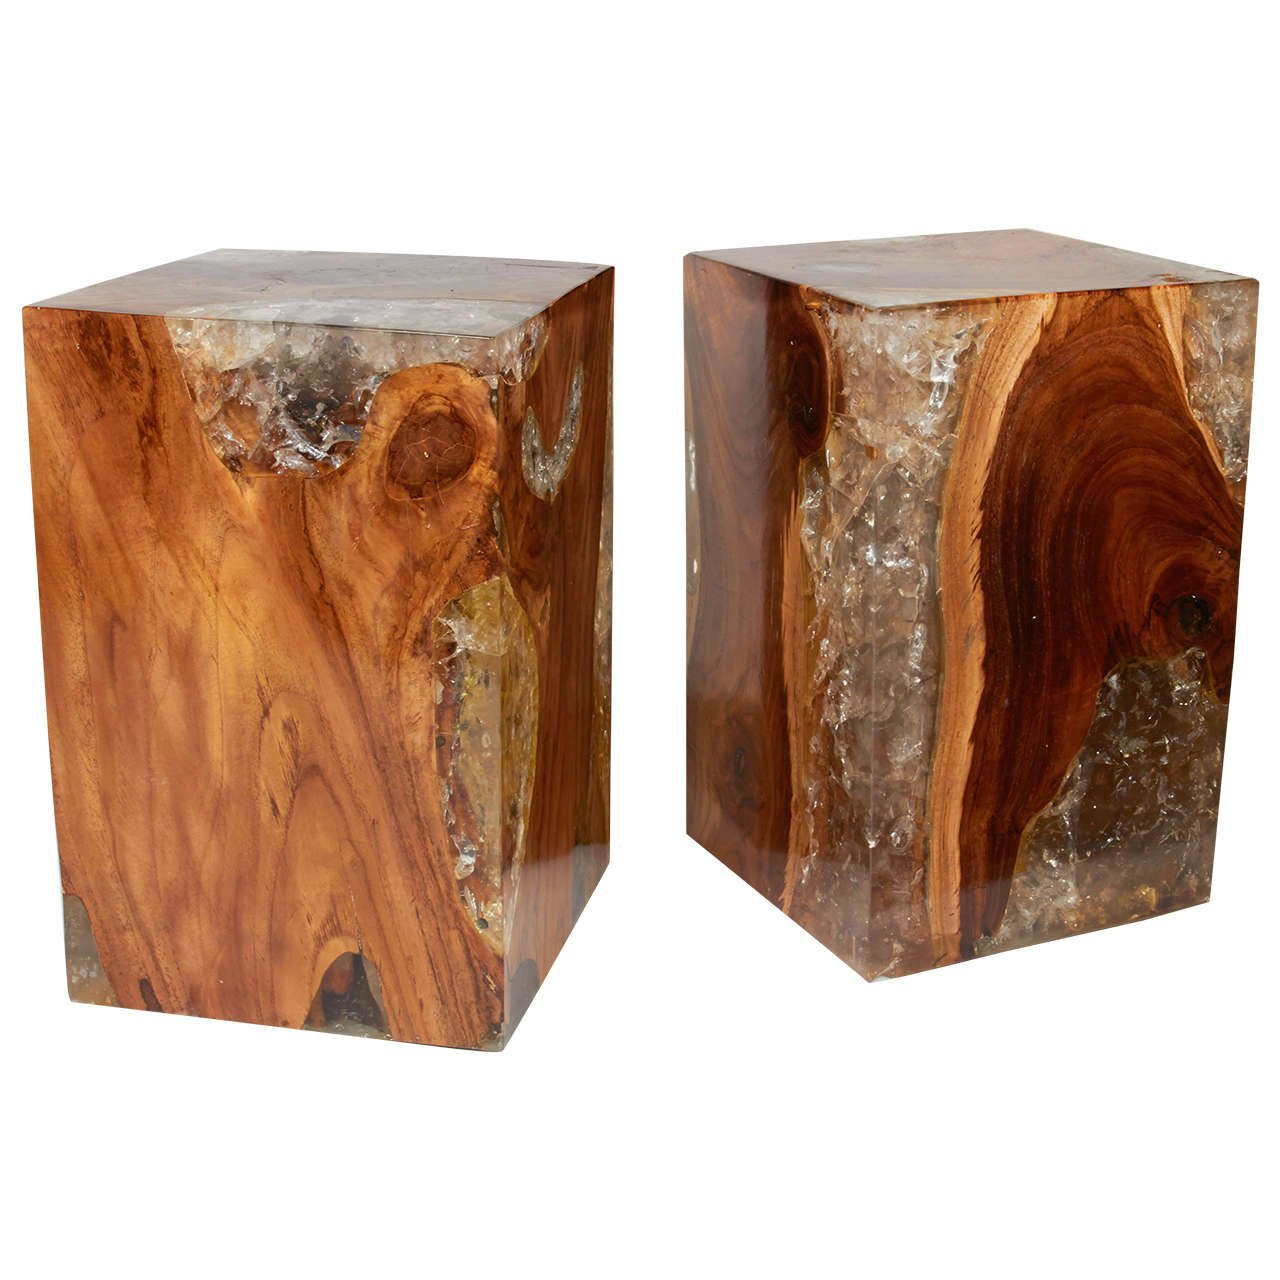 Pair of Modern Organic Teak Wood and Cracked Resin Side Tables